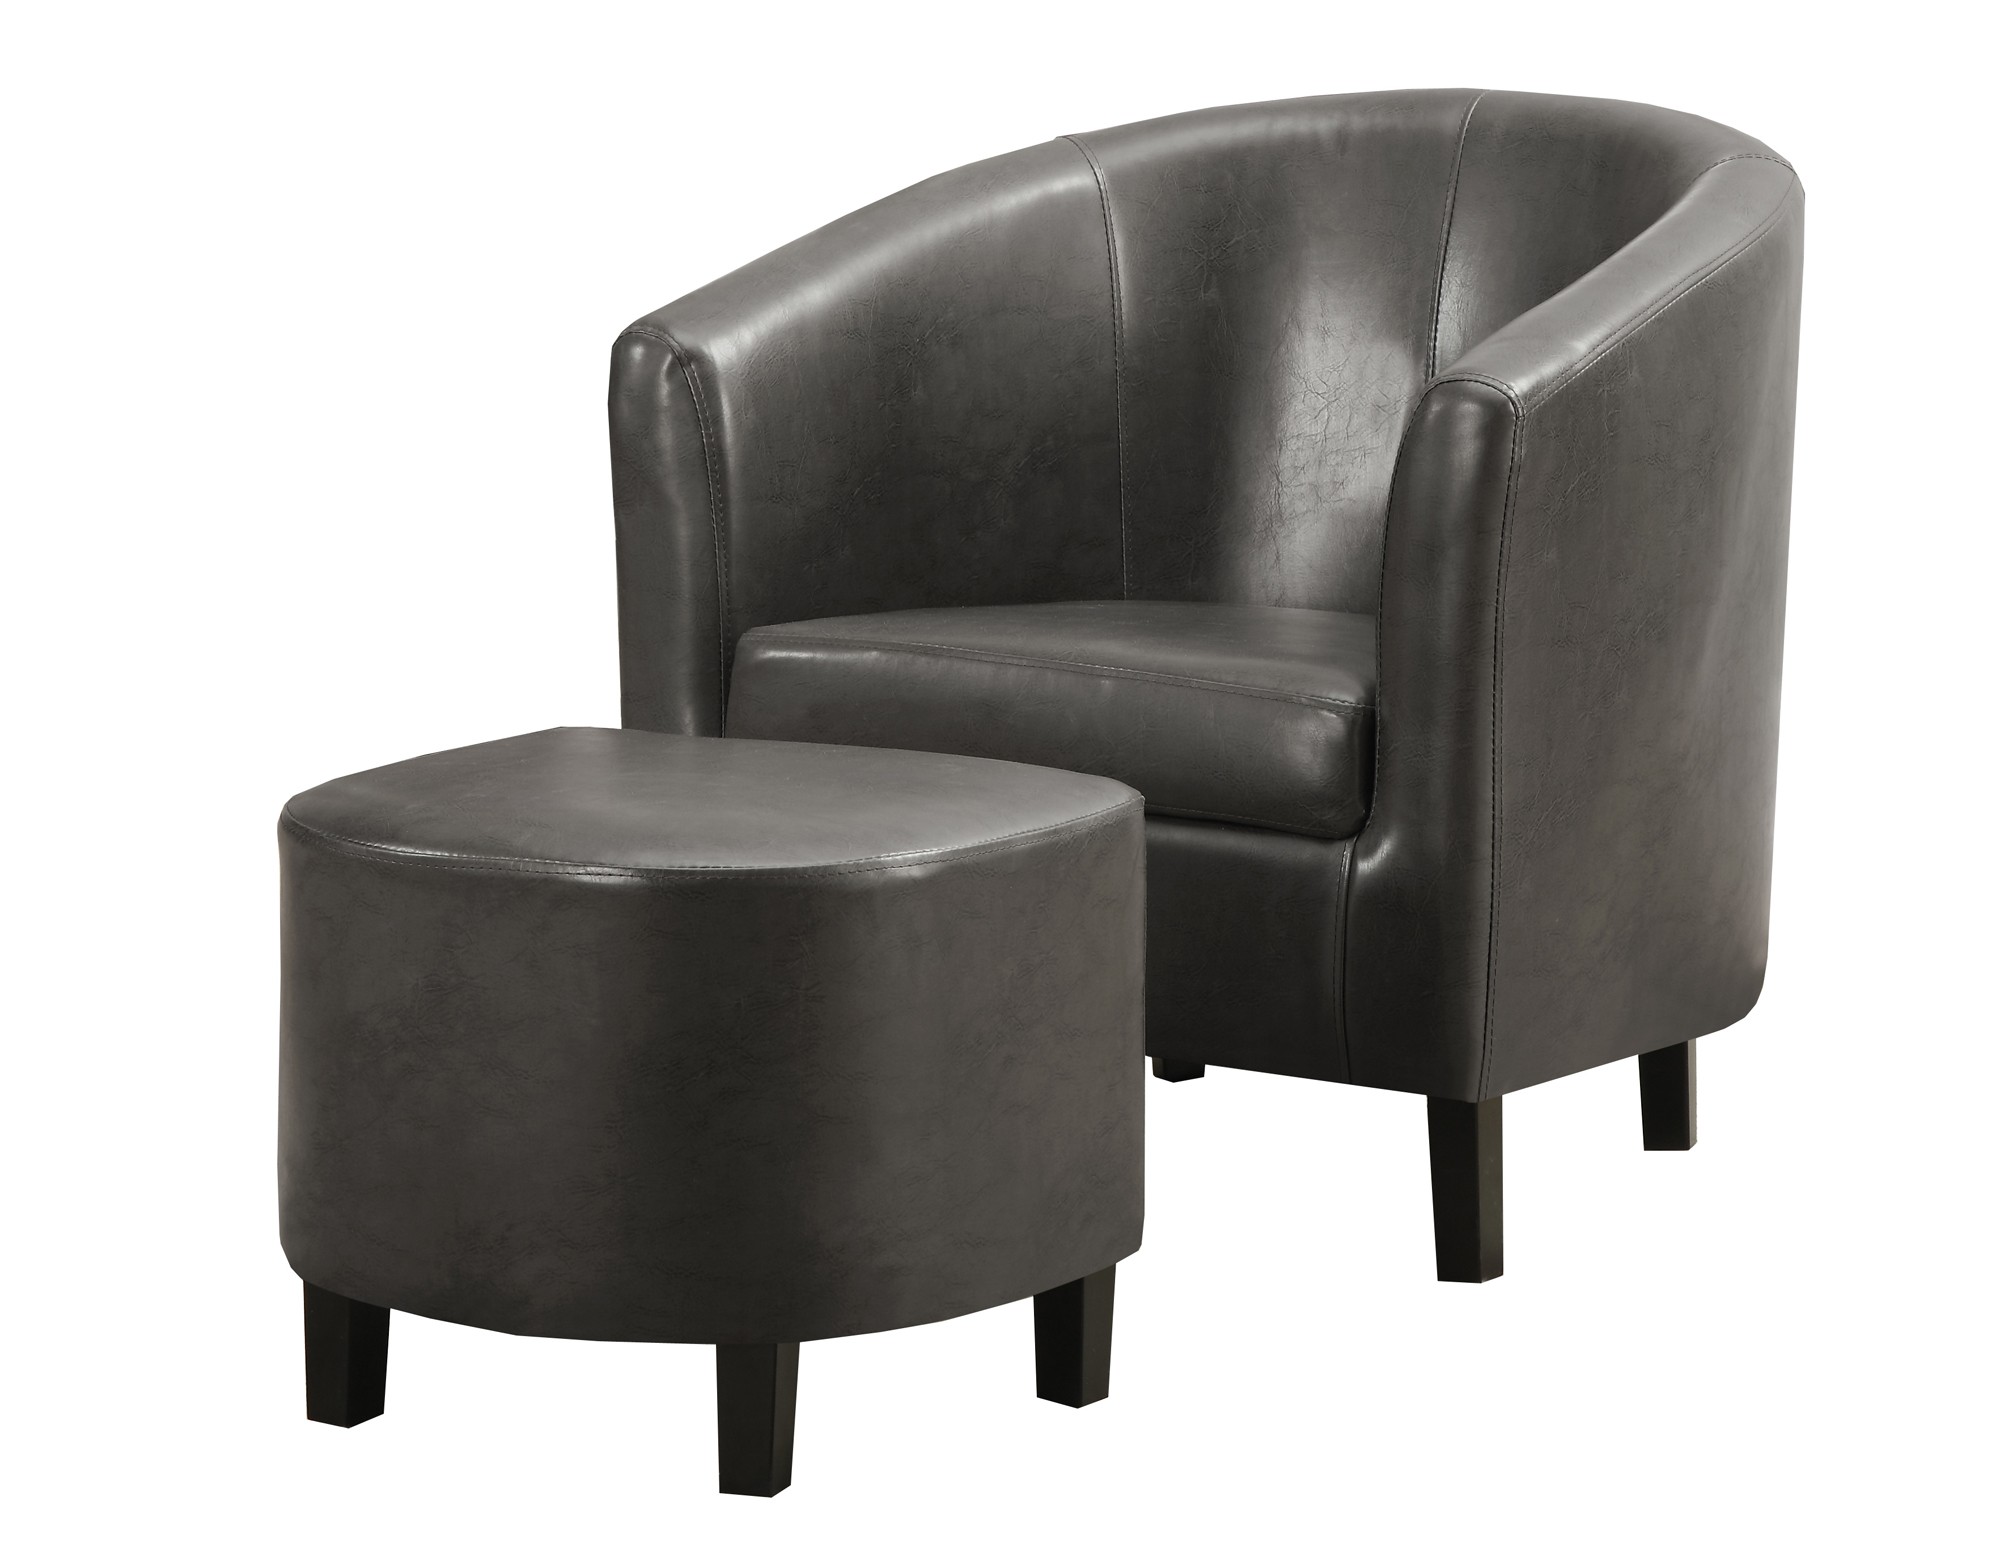 45.5" x 49" x 45.5" Charcoal Black Leather-Look Foam Accent Chair with Solid Wood Frame